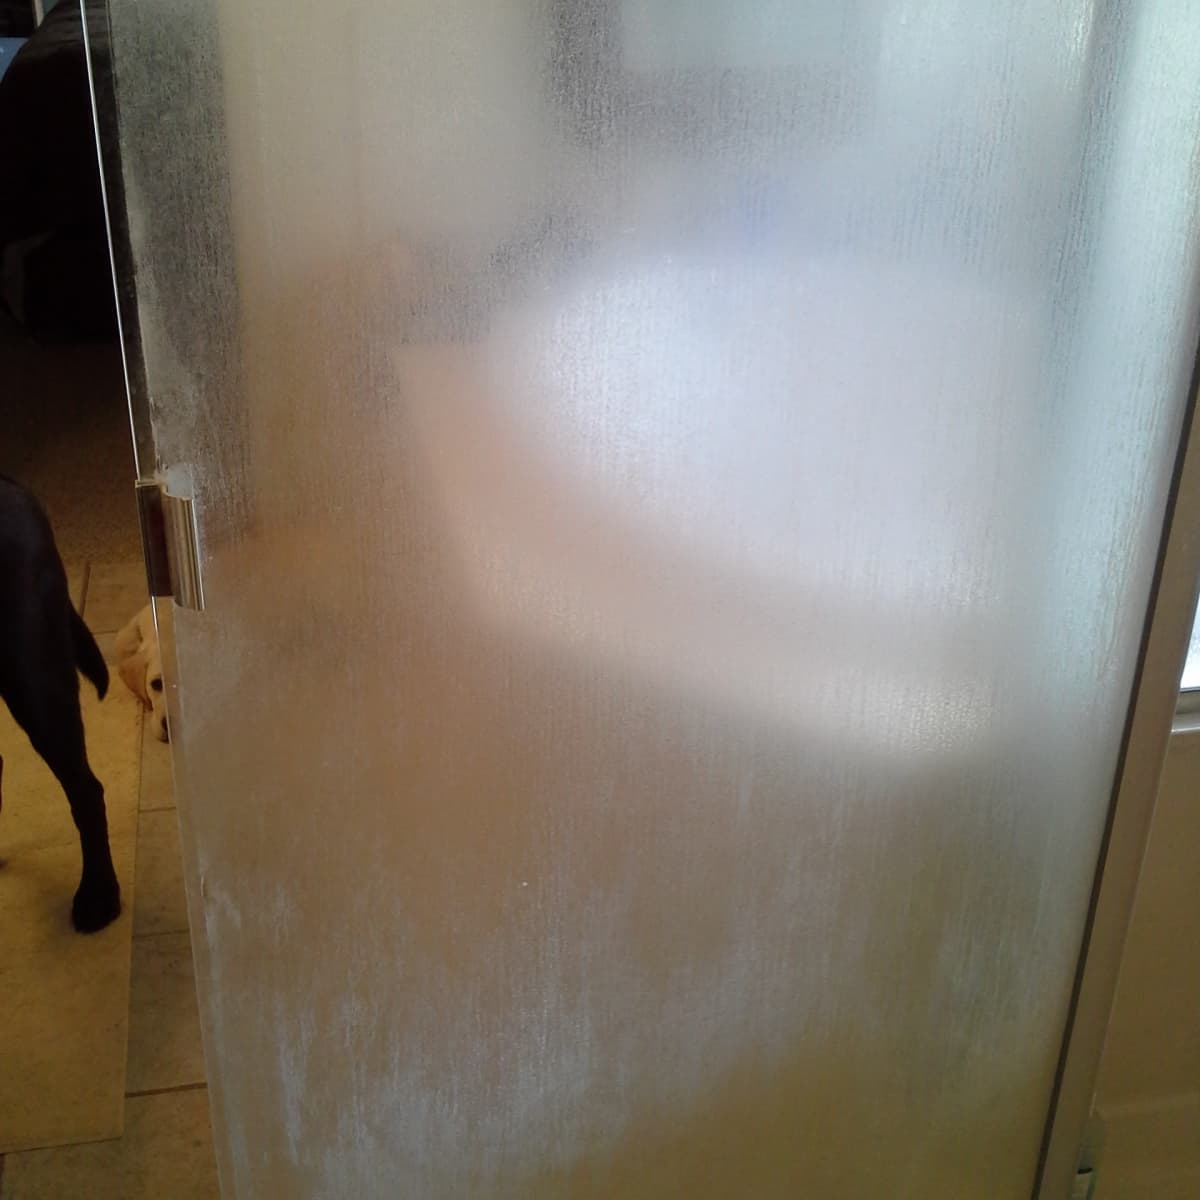 How do you get rid of limescale on shower doors How To Get Rid Of Water Spots Lime Scale Dengarden